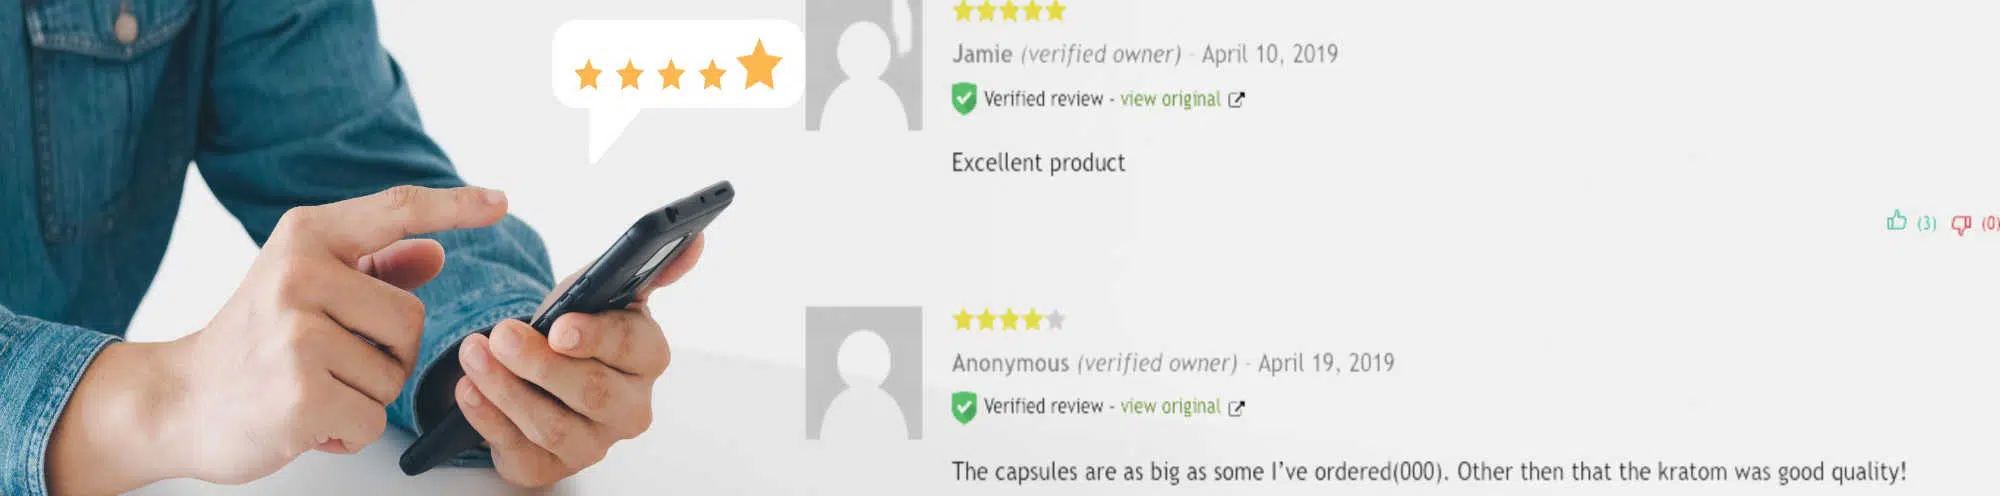 image of experience botanicals customer reviews